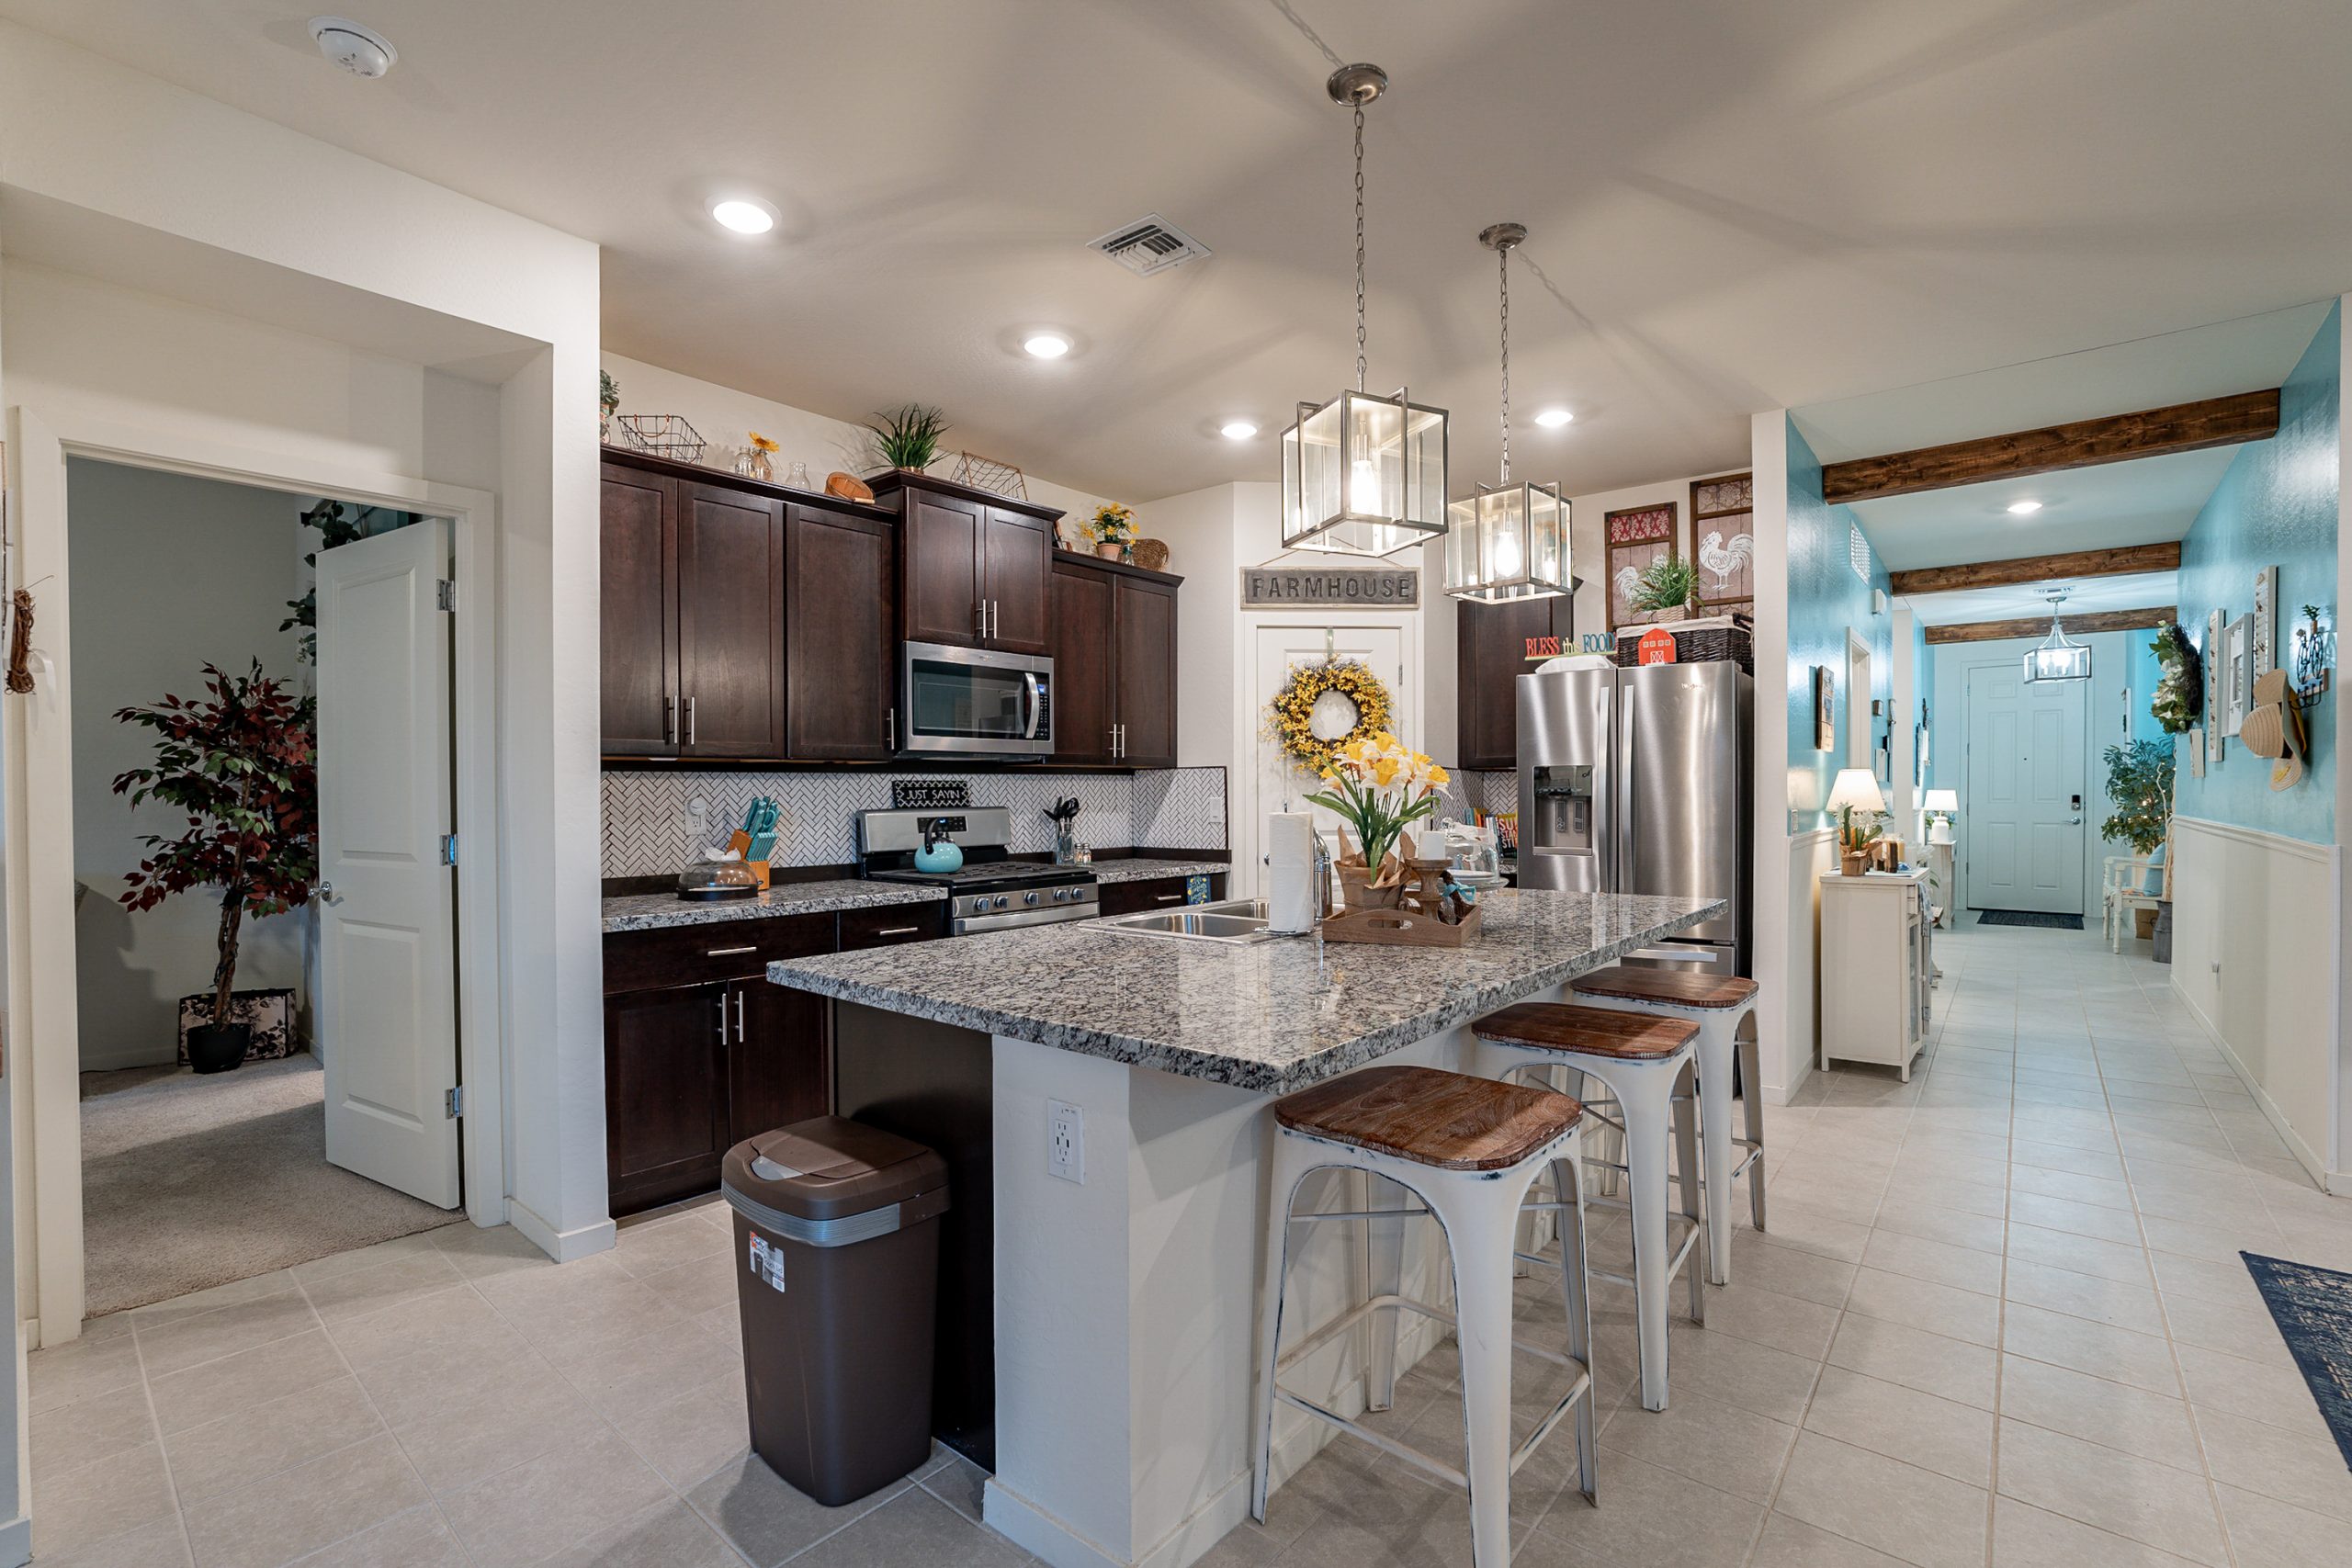 Andrew Piane Glendale, AZ sold home showing the kitchen with pendant lighting and quartz countertops